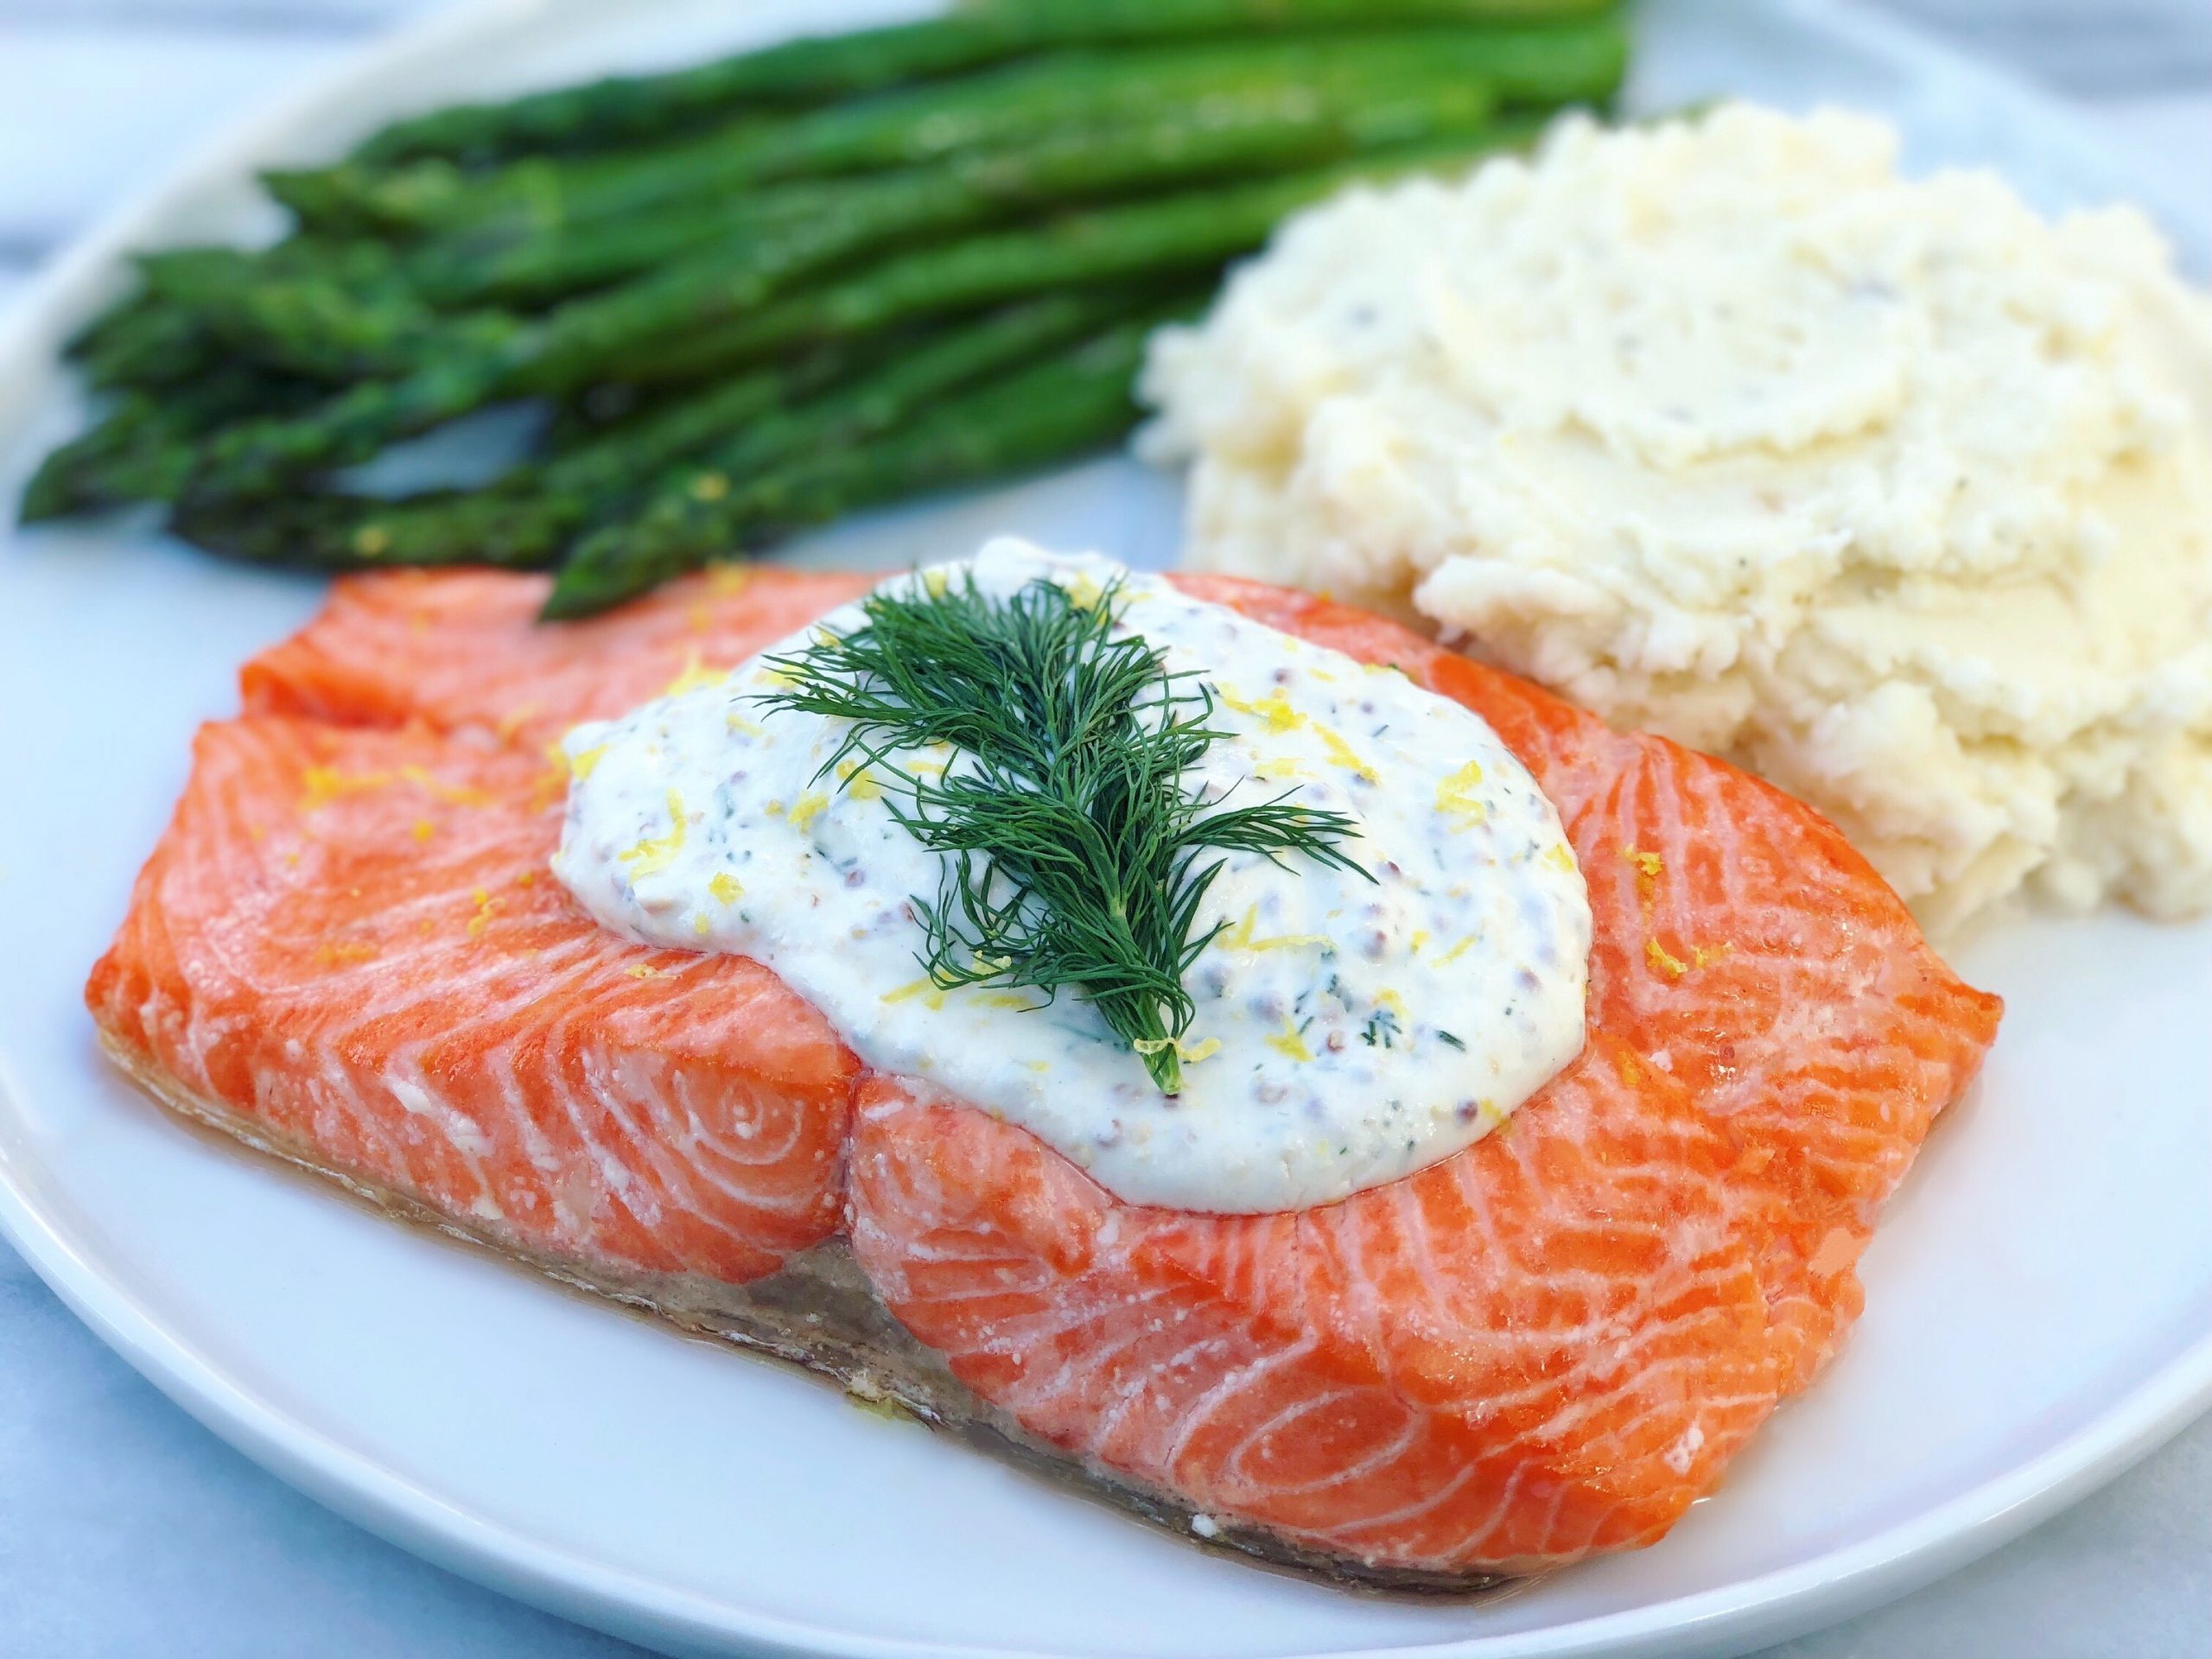 Dish of Baked Salmon with Creamy Dill Mustard Sauce